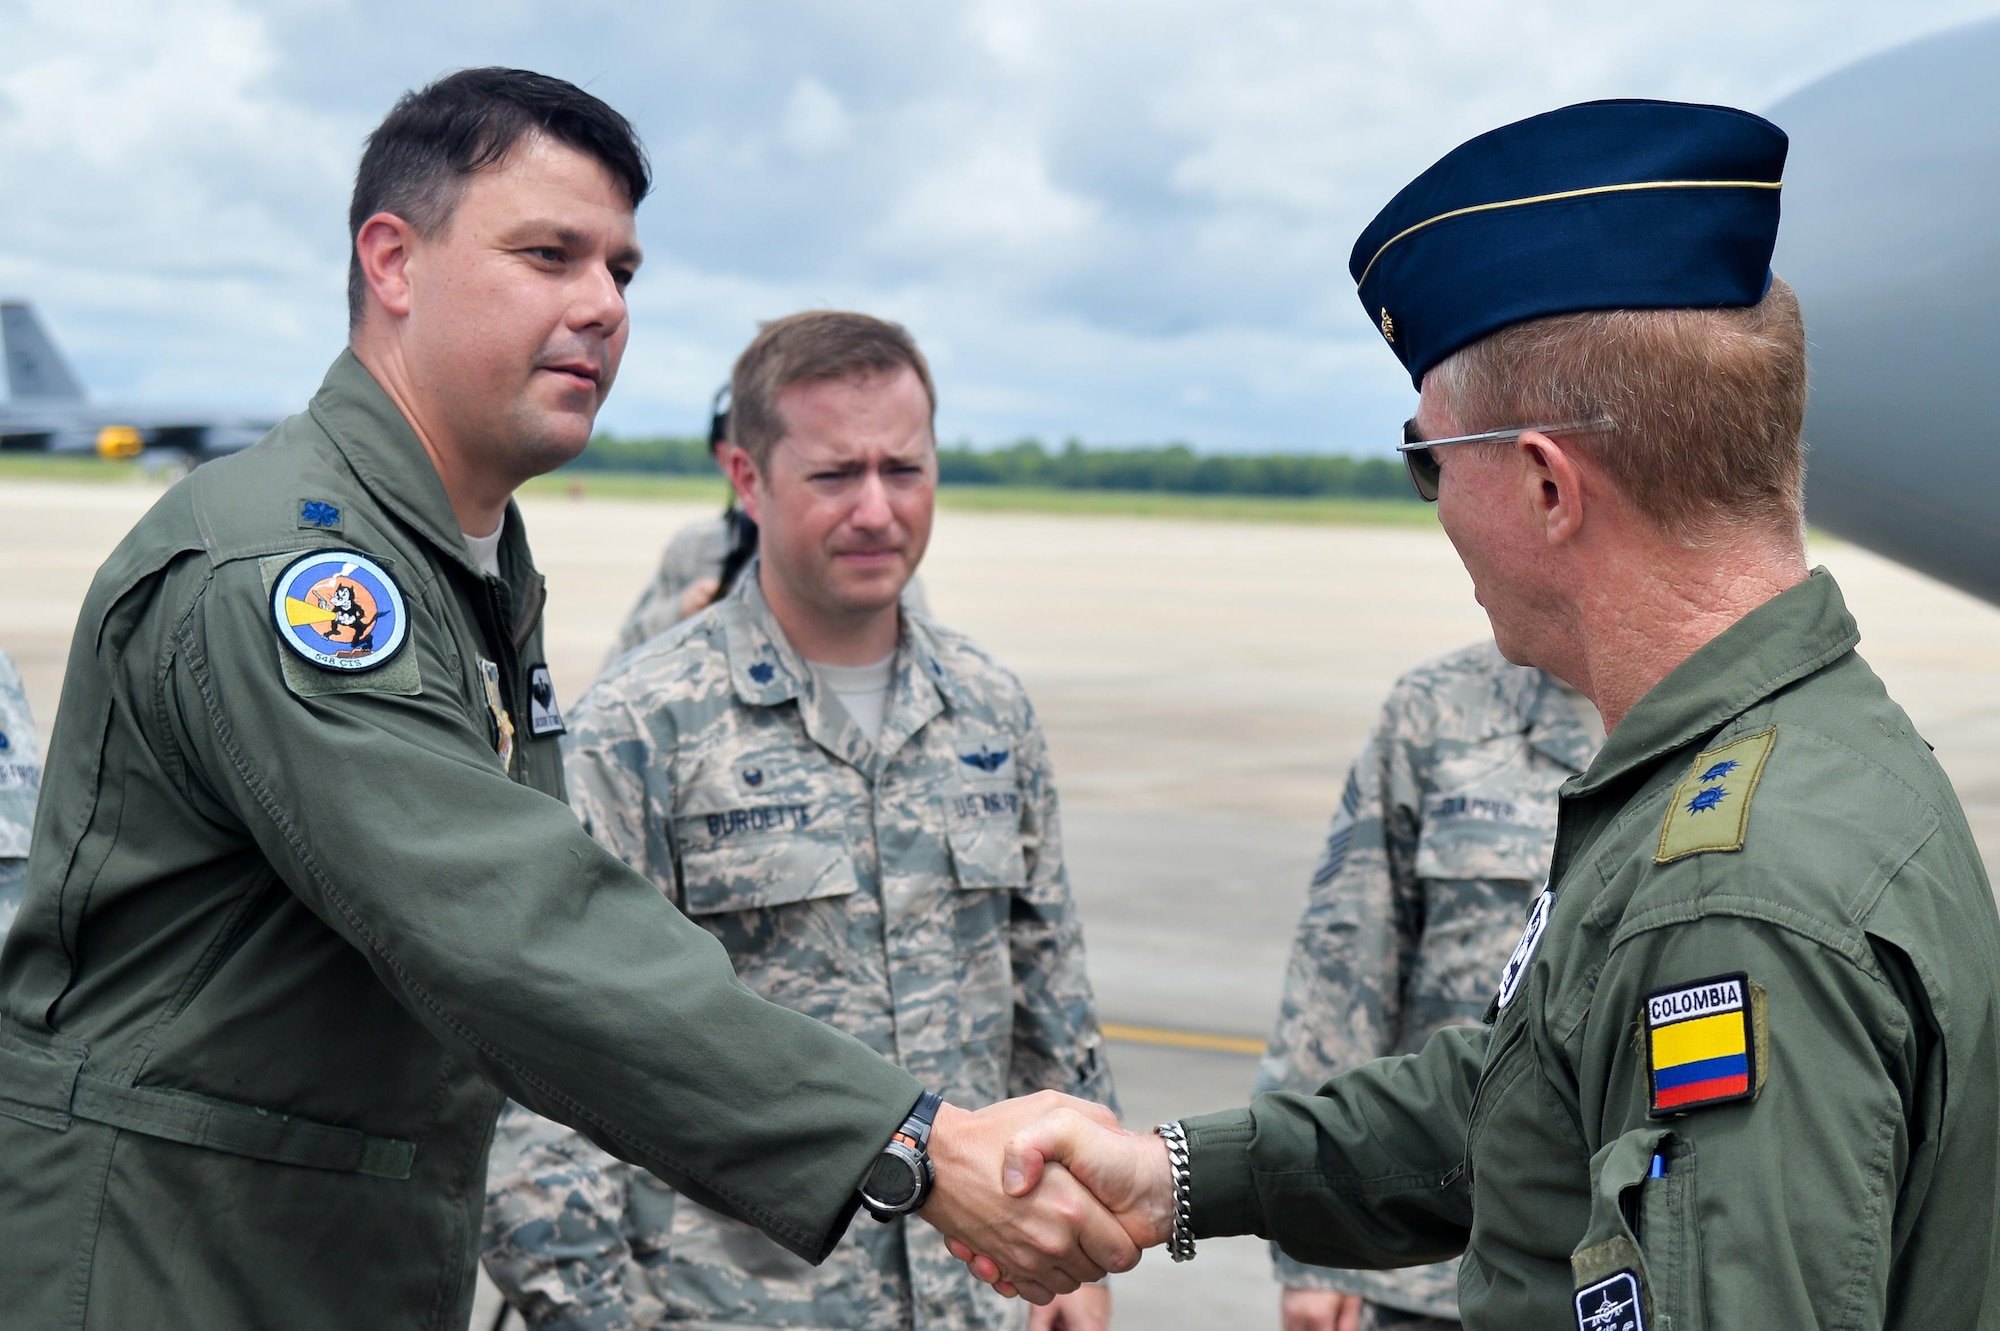 Lt. Col. Jason Attaway, 548th Combat Training Squadron, Detachment 1 commander, greets Colombian Air Force Brig. Gen. Rodrigo Alejandro Valencia Guevara upon his arrival to Barksdale Air Force Base, La., Aug. 13, 2016. The Colombians are participating in Exercise Green Flag East, which is administered by the 548th CTS detachment. (U.S. Air Force photo/Senior Airman Mozer O. Da Cunha)